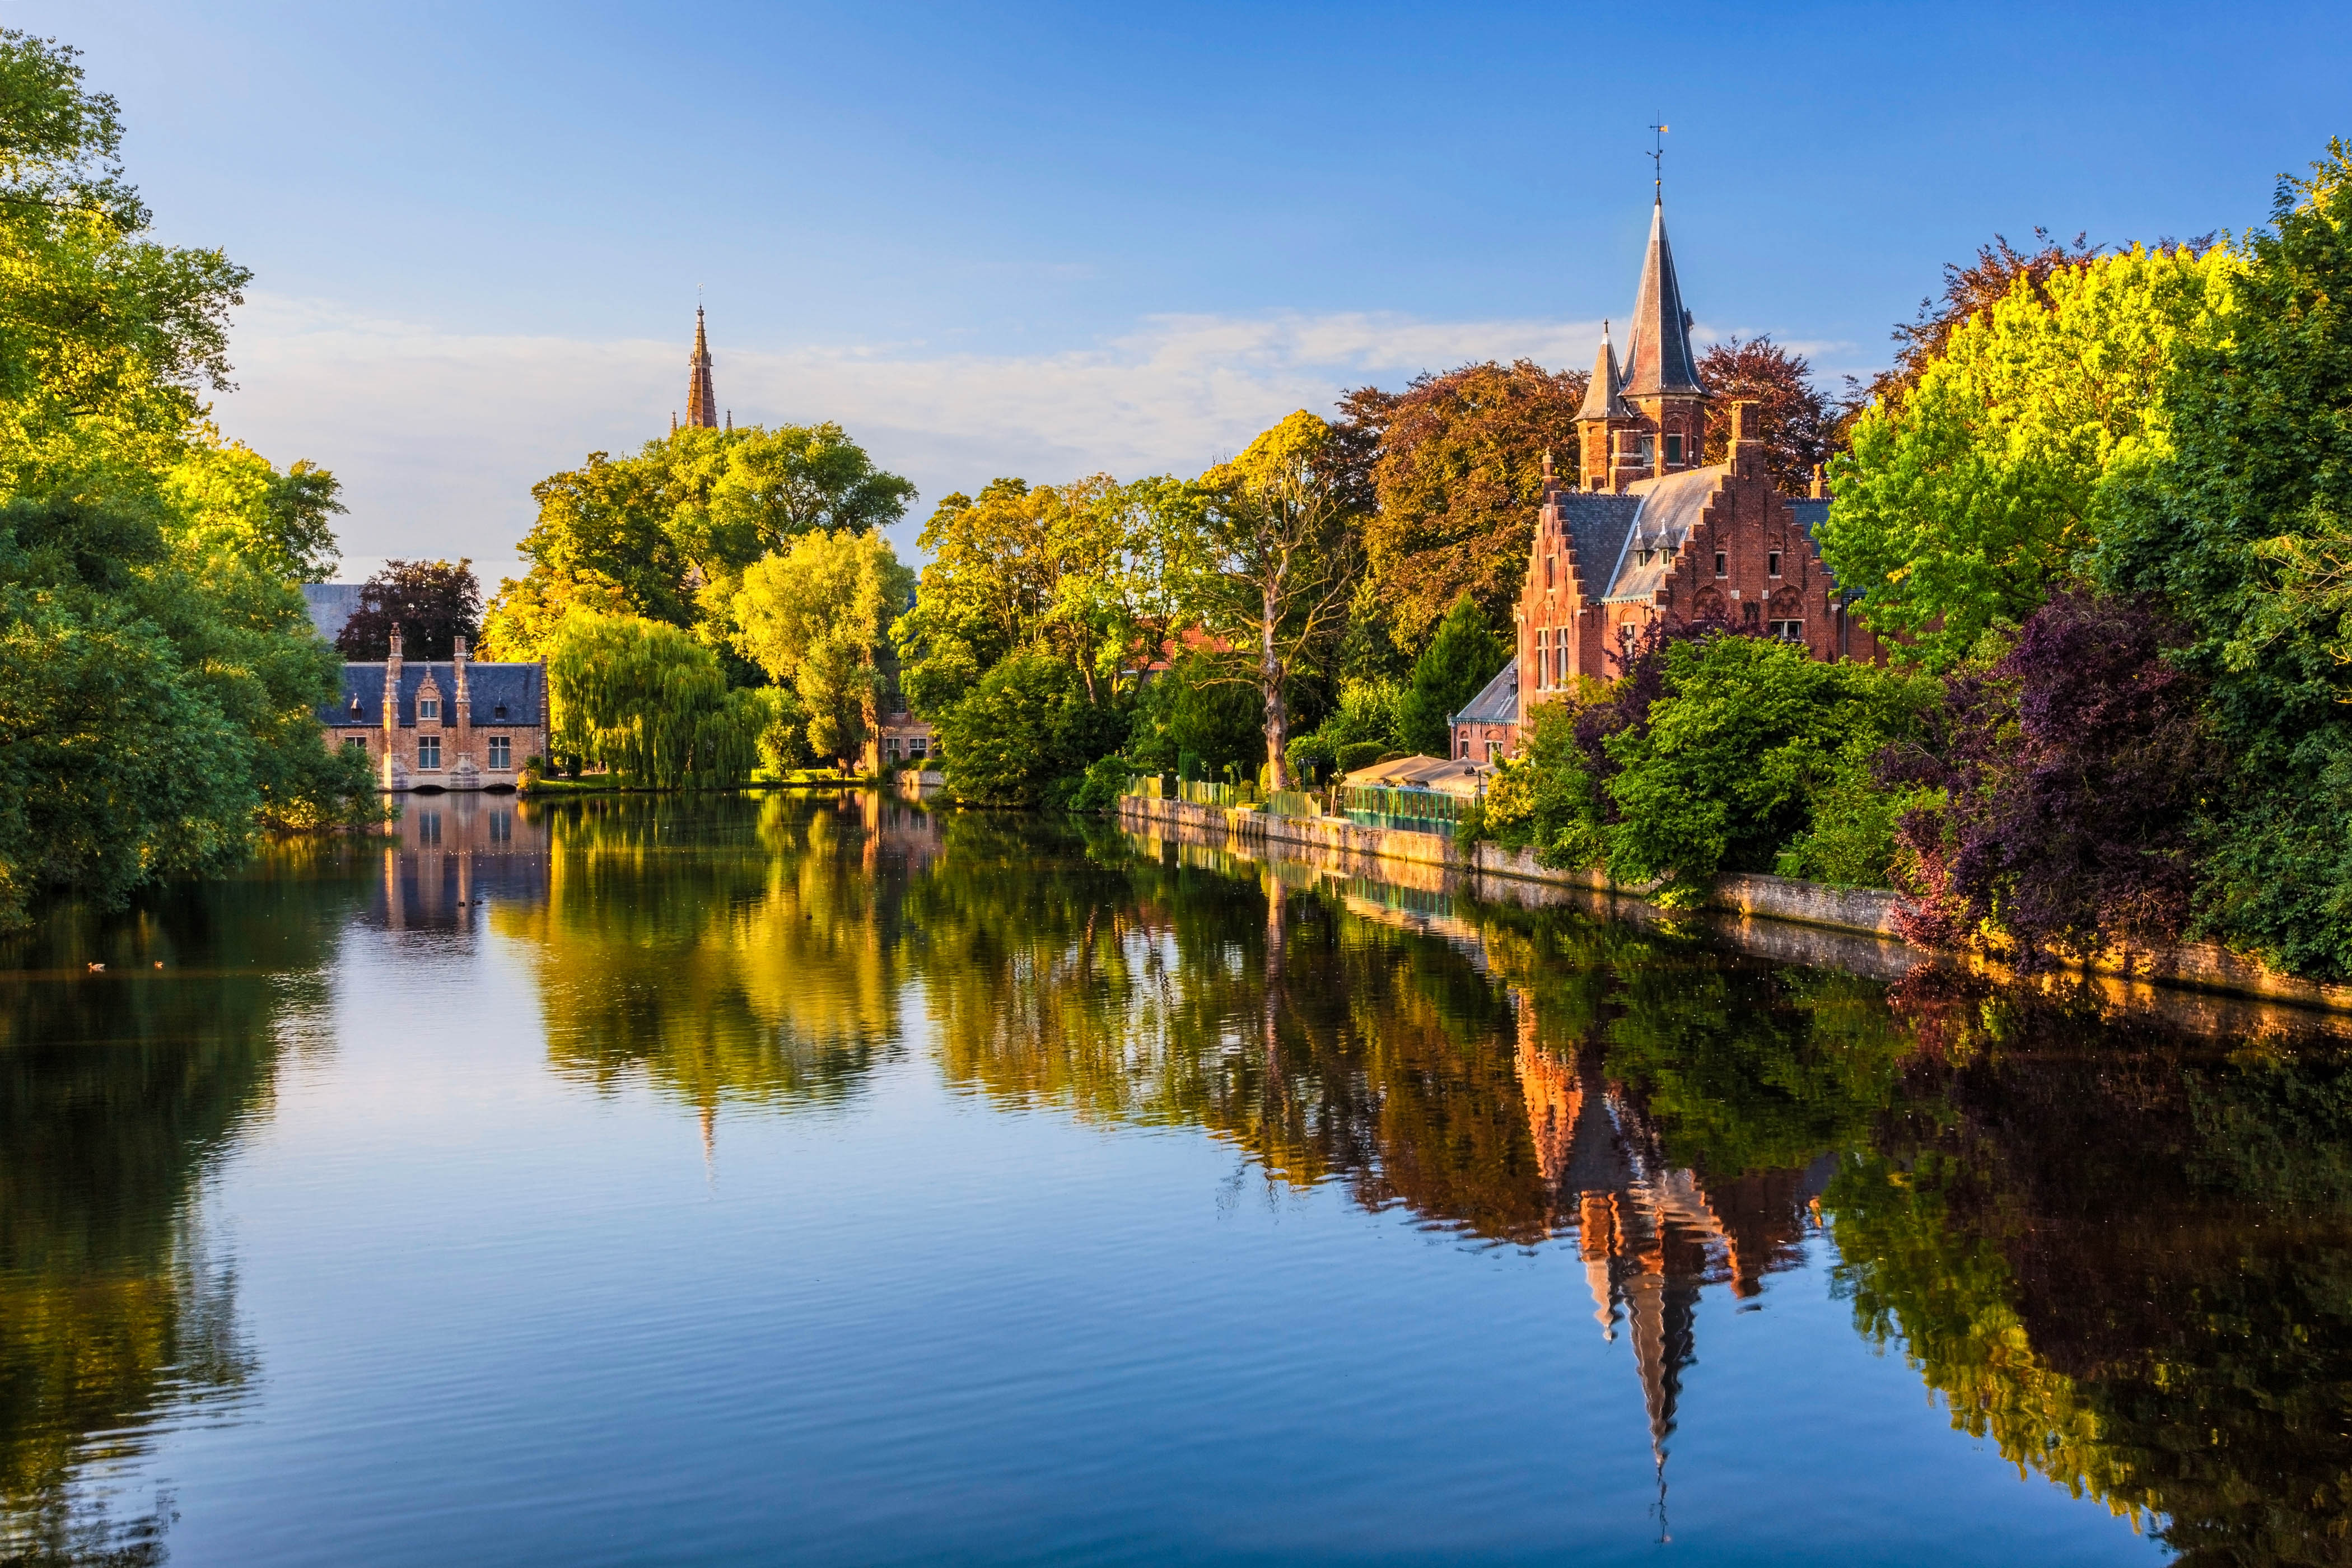 The Minnewater (or Lake of Love), a fairytale scene in historic Bruges